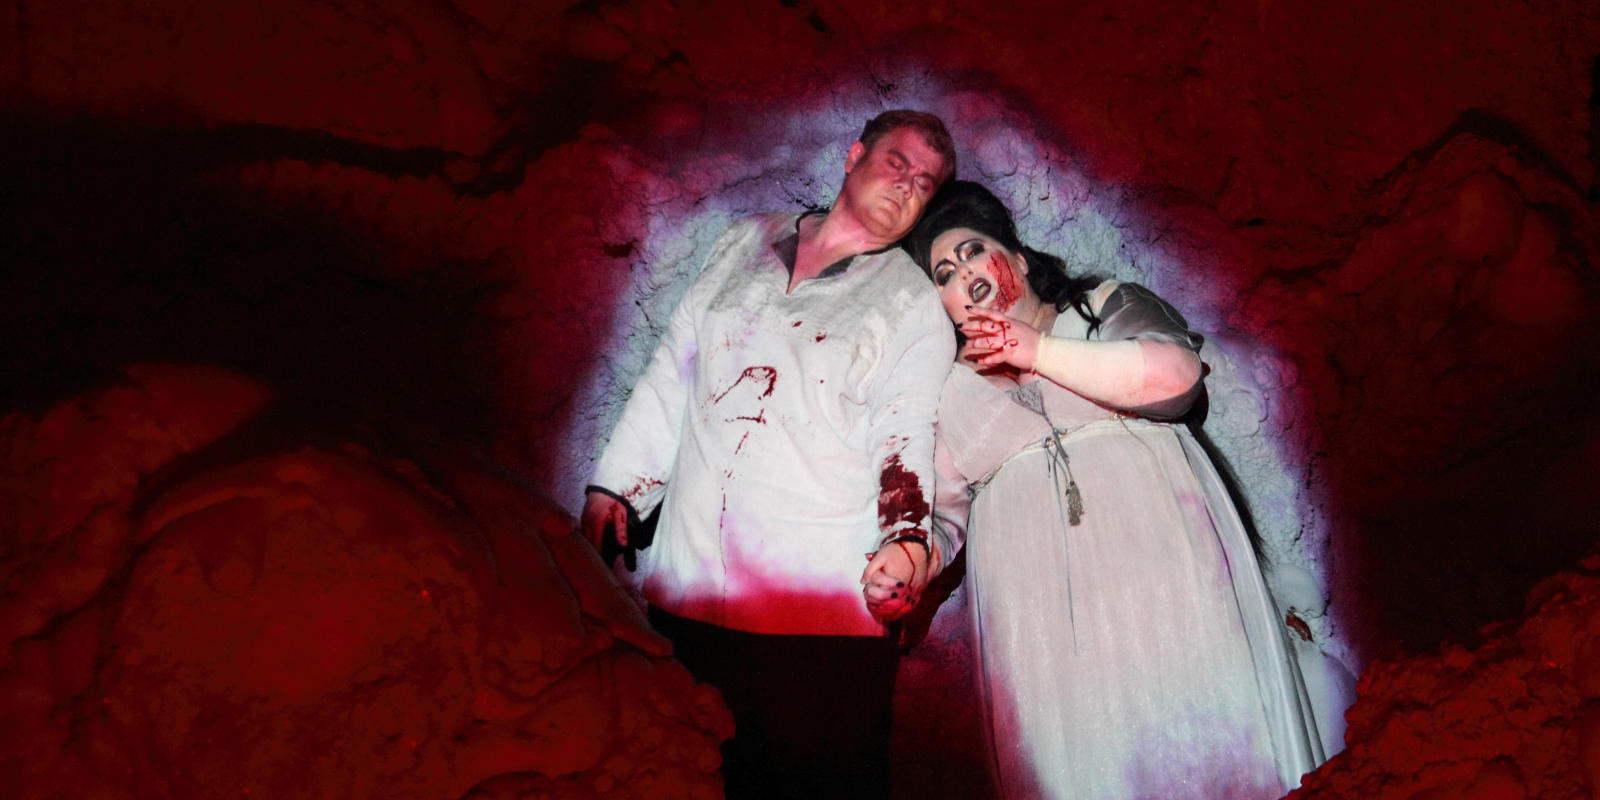 man and woman covered in blood lying on the floor from ENO's Tristan and Isolde